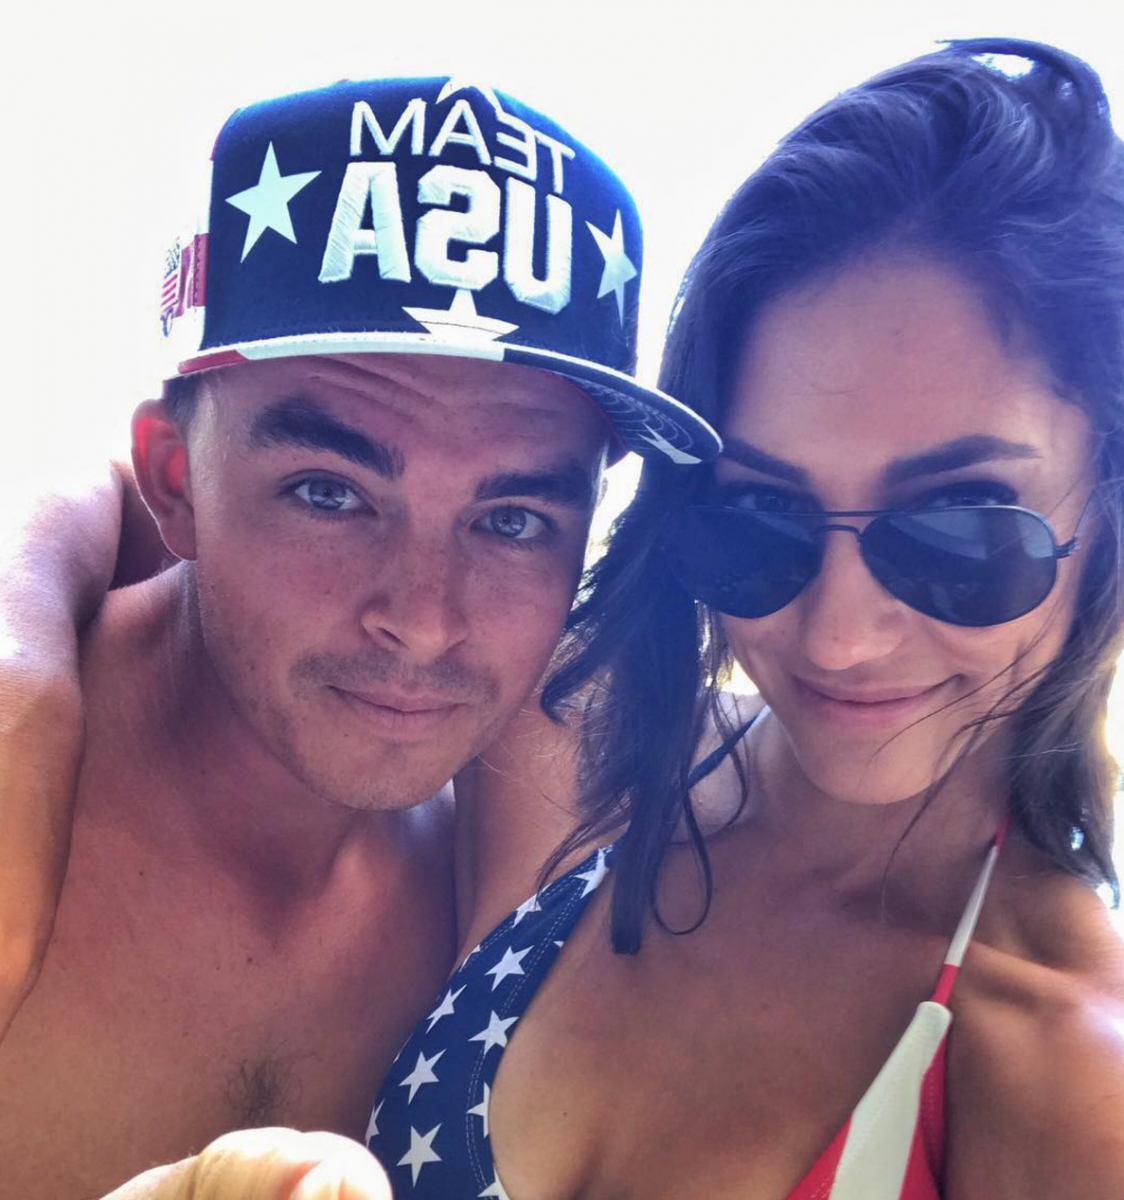 Rickie Fowler with pole vaulter girlfriend Allison Stokke